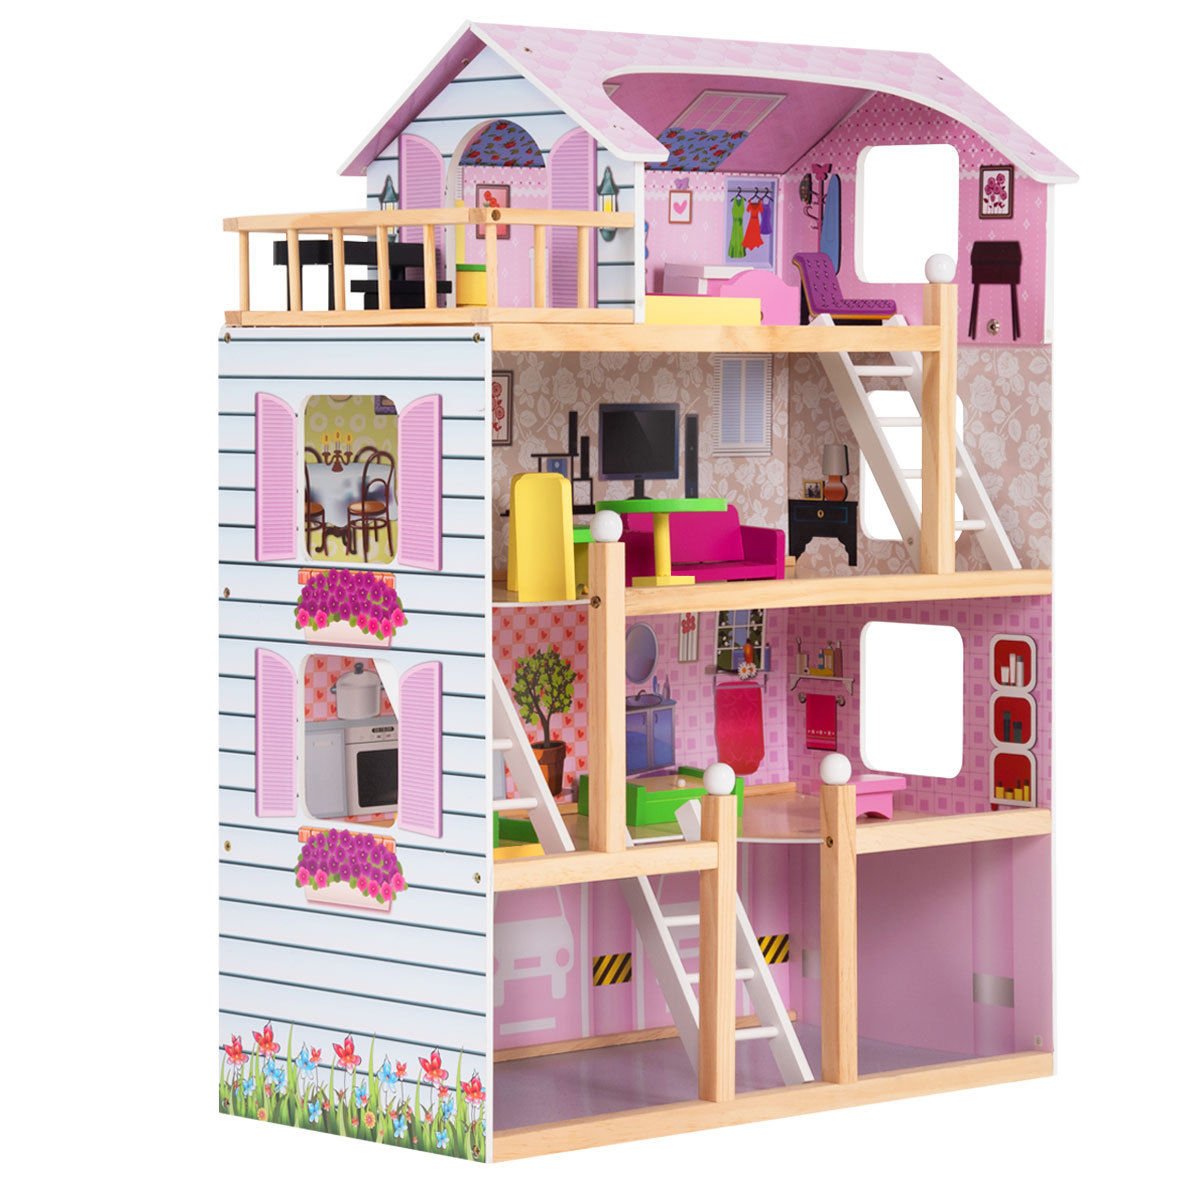 Kids Wood House Playset Doll Cottage Dollhouse W/ Furniture Children Gift Toy